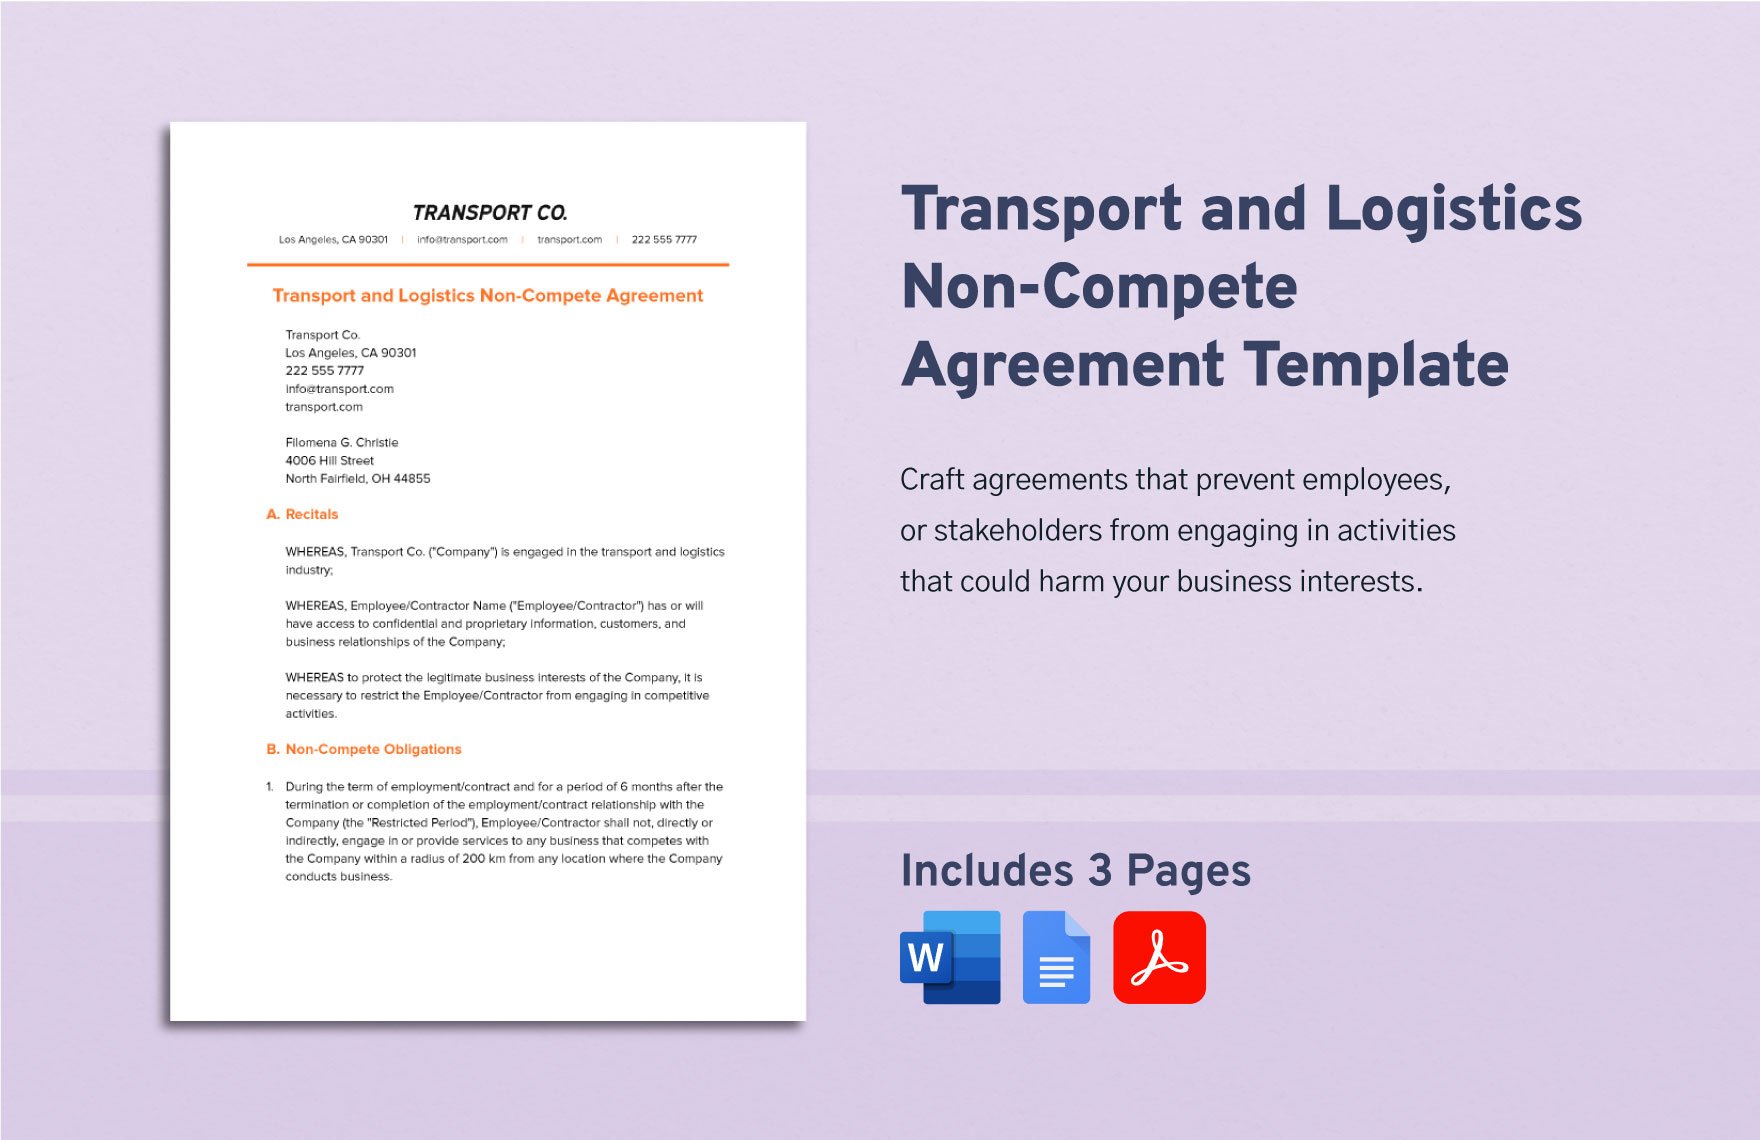 Transport and Logistics Non-Compete Agreement Template